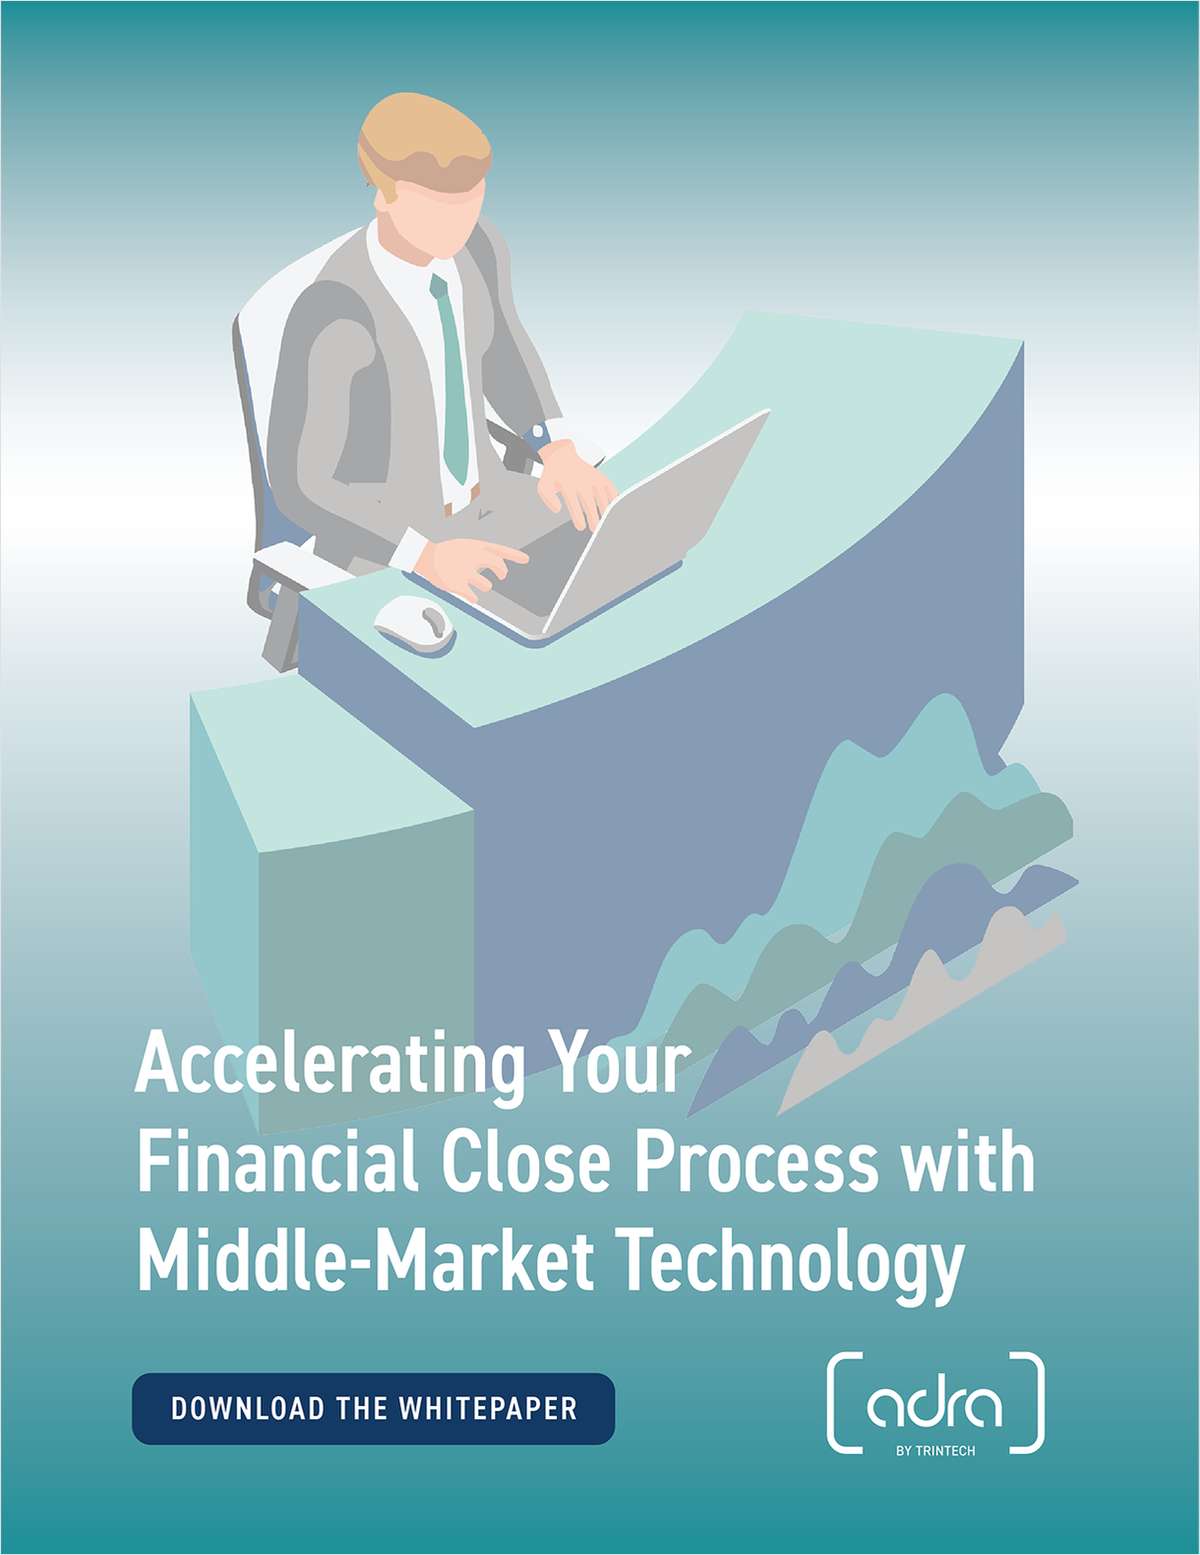 Accelerating Your Financial Close Process with Middle-Market Technology